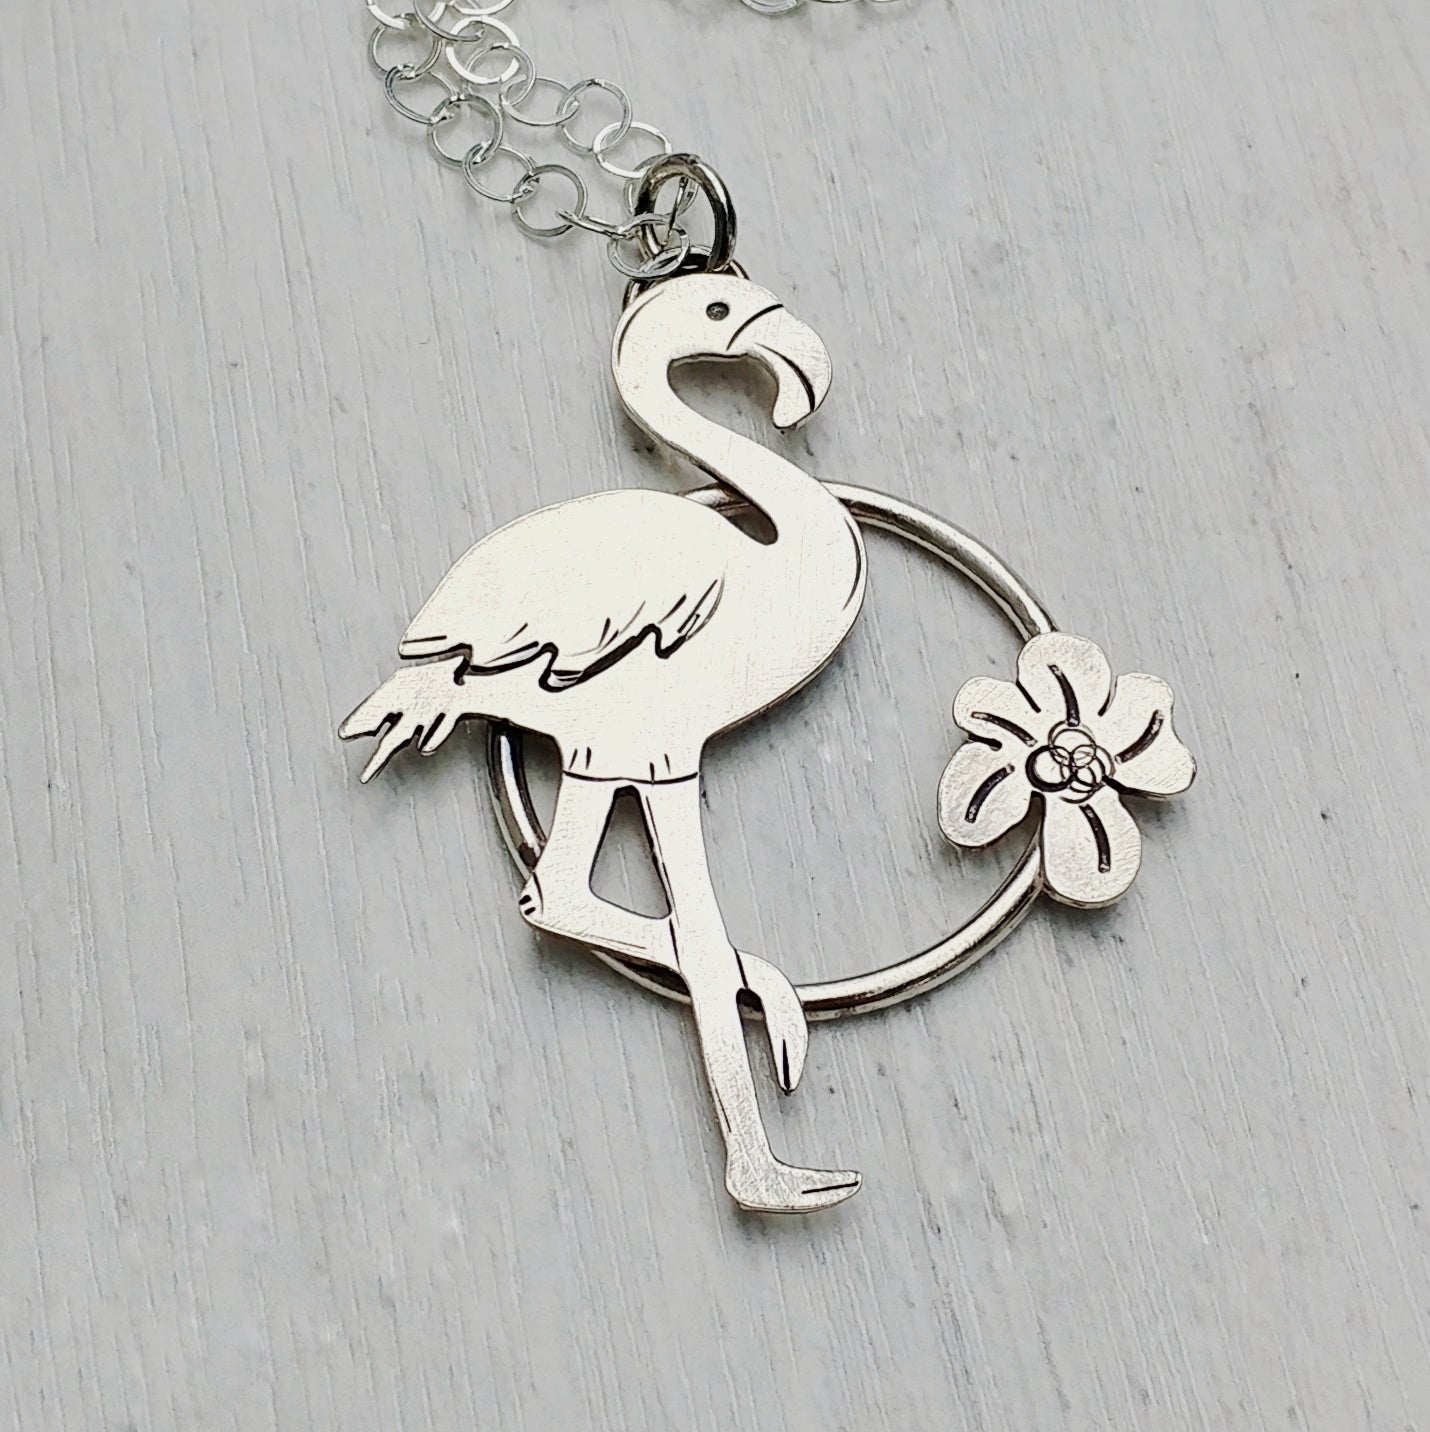 Flamingo necklace with flower made of sterling silver